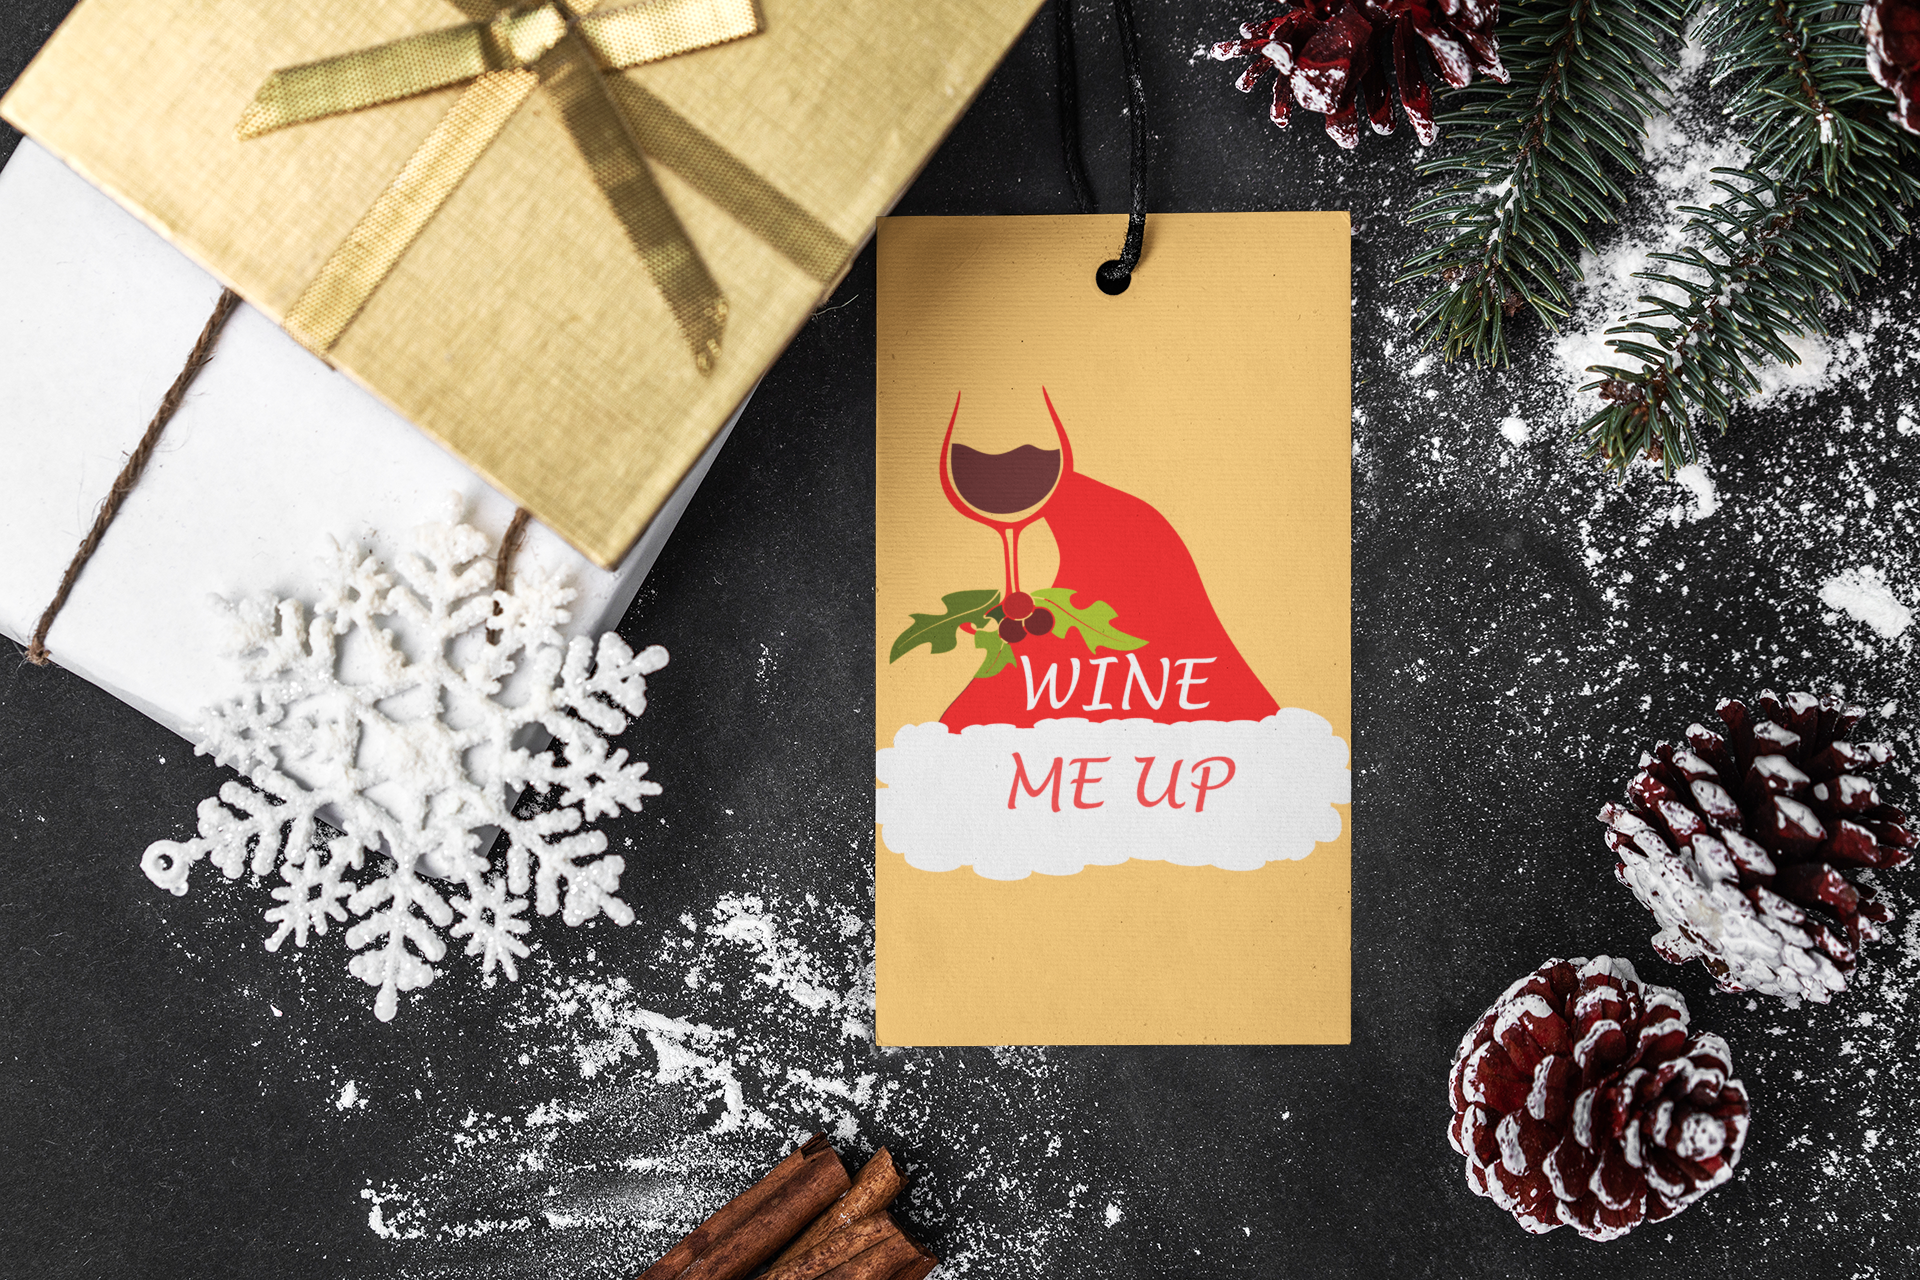 Wine Me Up! Celebrate Christmas with a glass of Vino and a friend!